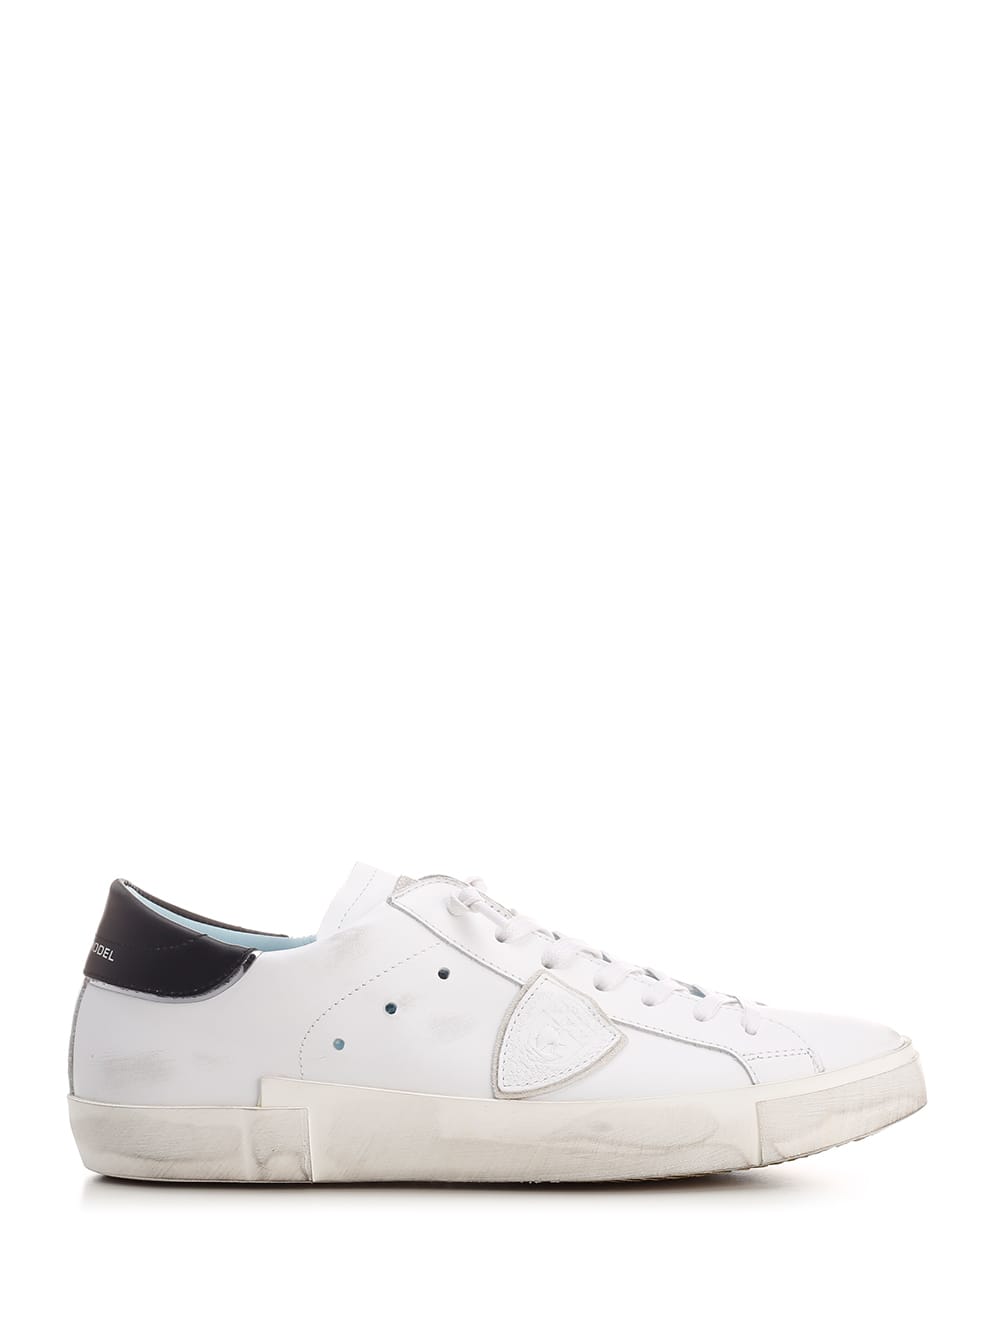 PHILIPPE MODEL WHITE PRSX LEATHER SNEAKERS WITH BLACK HEEL TAB